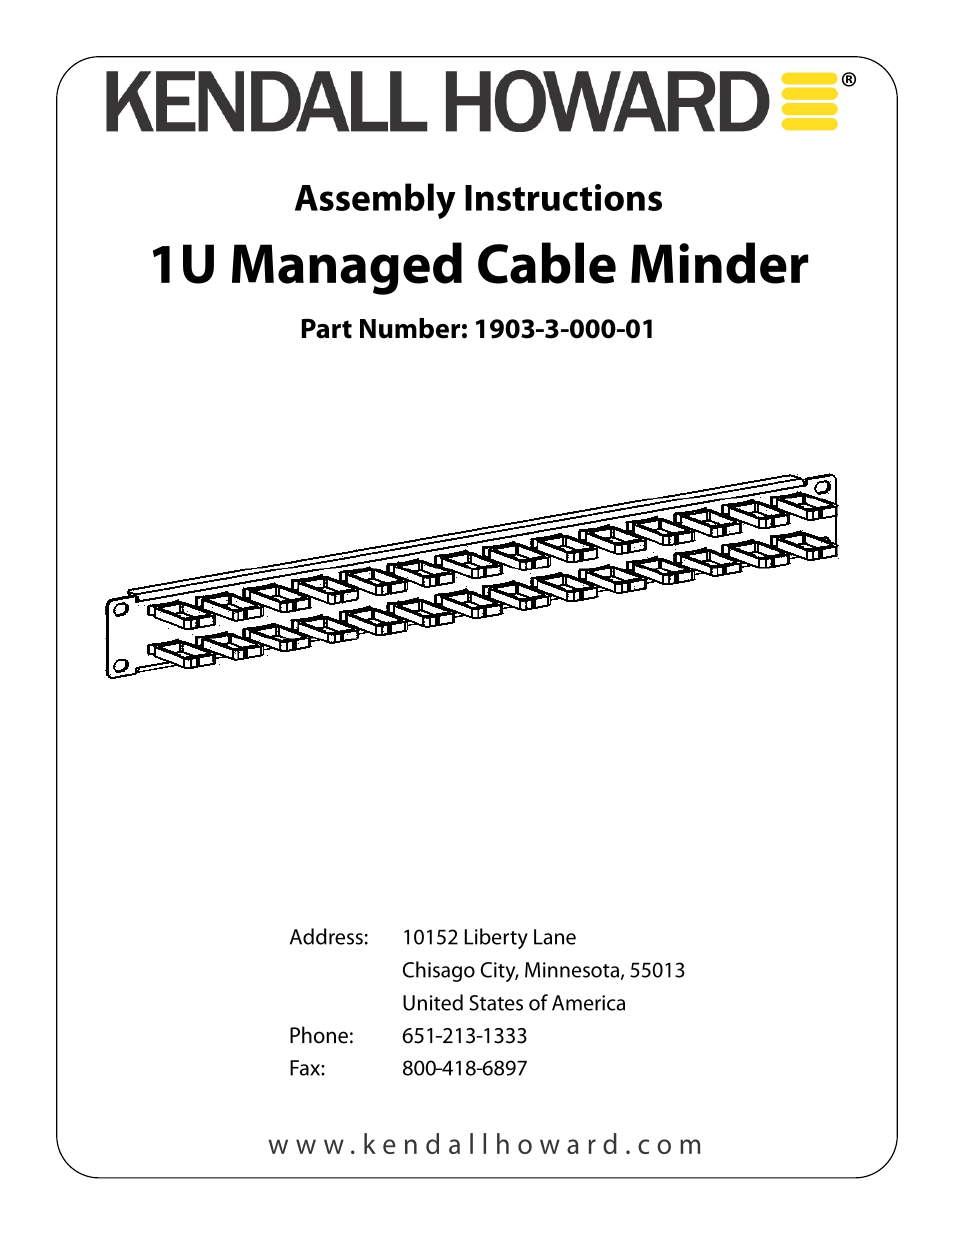 1903-3-000-01 Managed Cable Minder